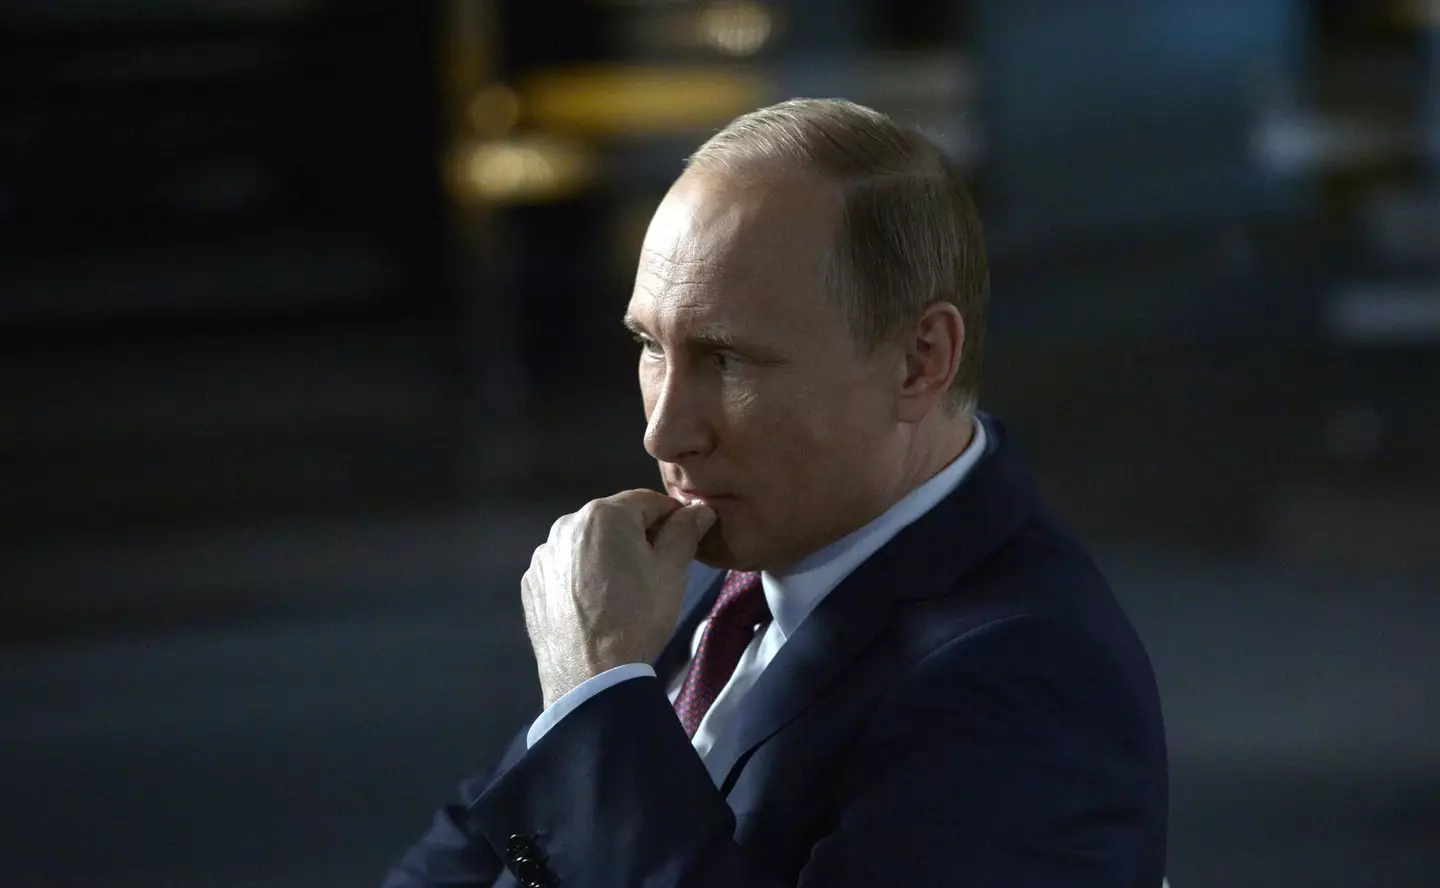 Things are not going well for Vladimir Putin, and now there are claims that he was the target of an assassination attempt.